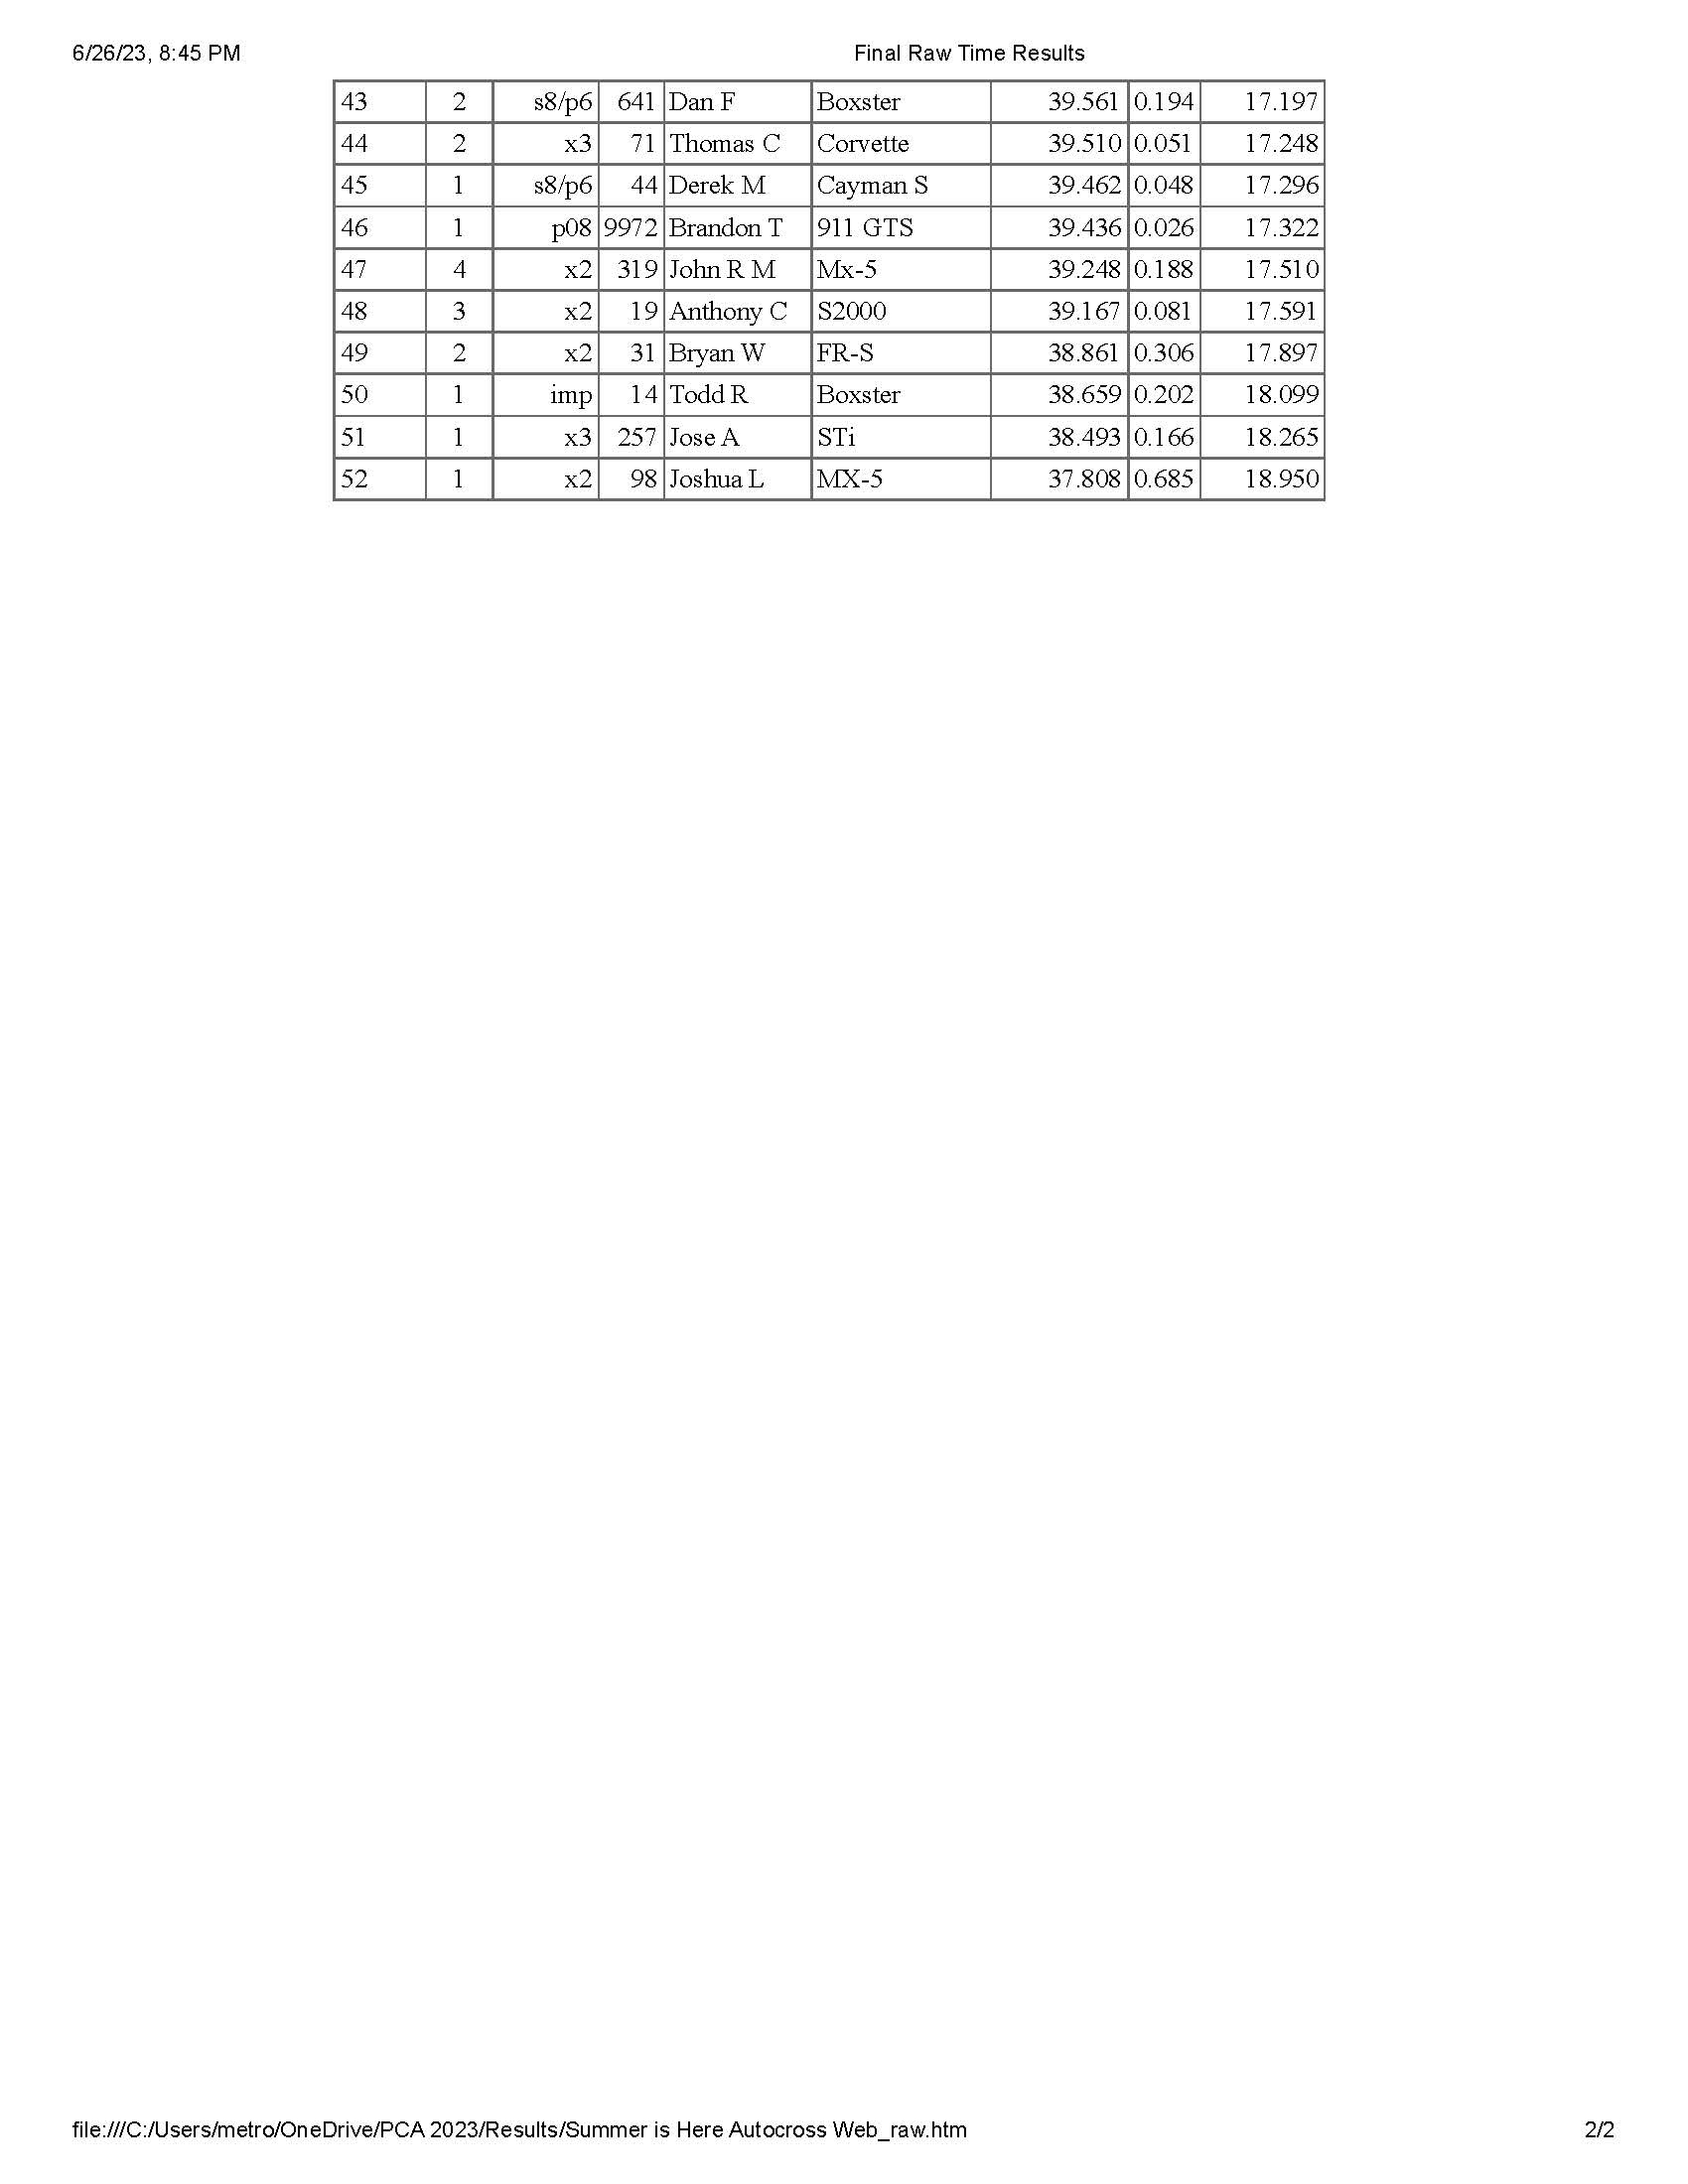 Summer is Here Autocross Final Raw Time Results Page 2